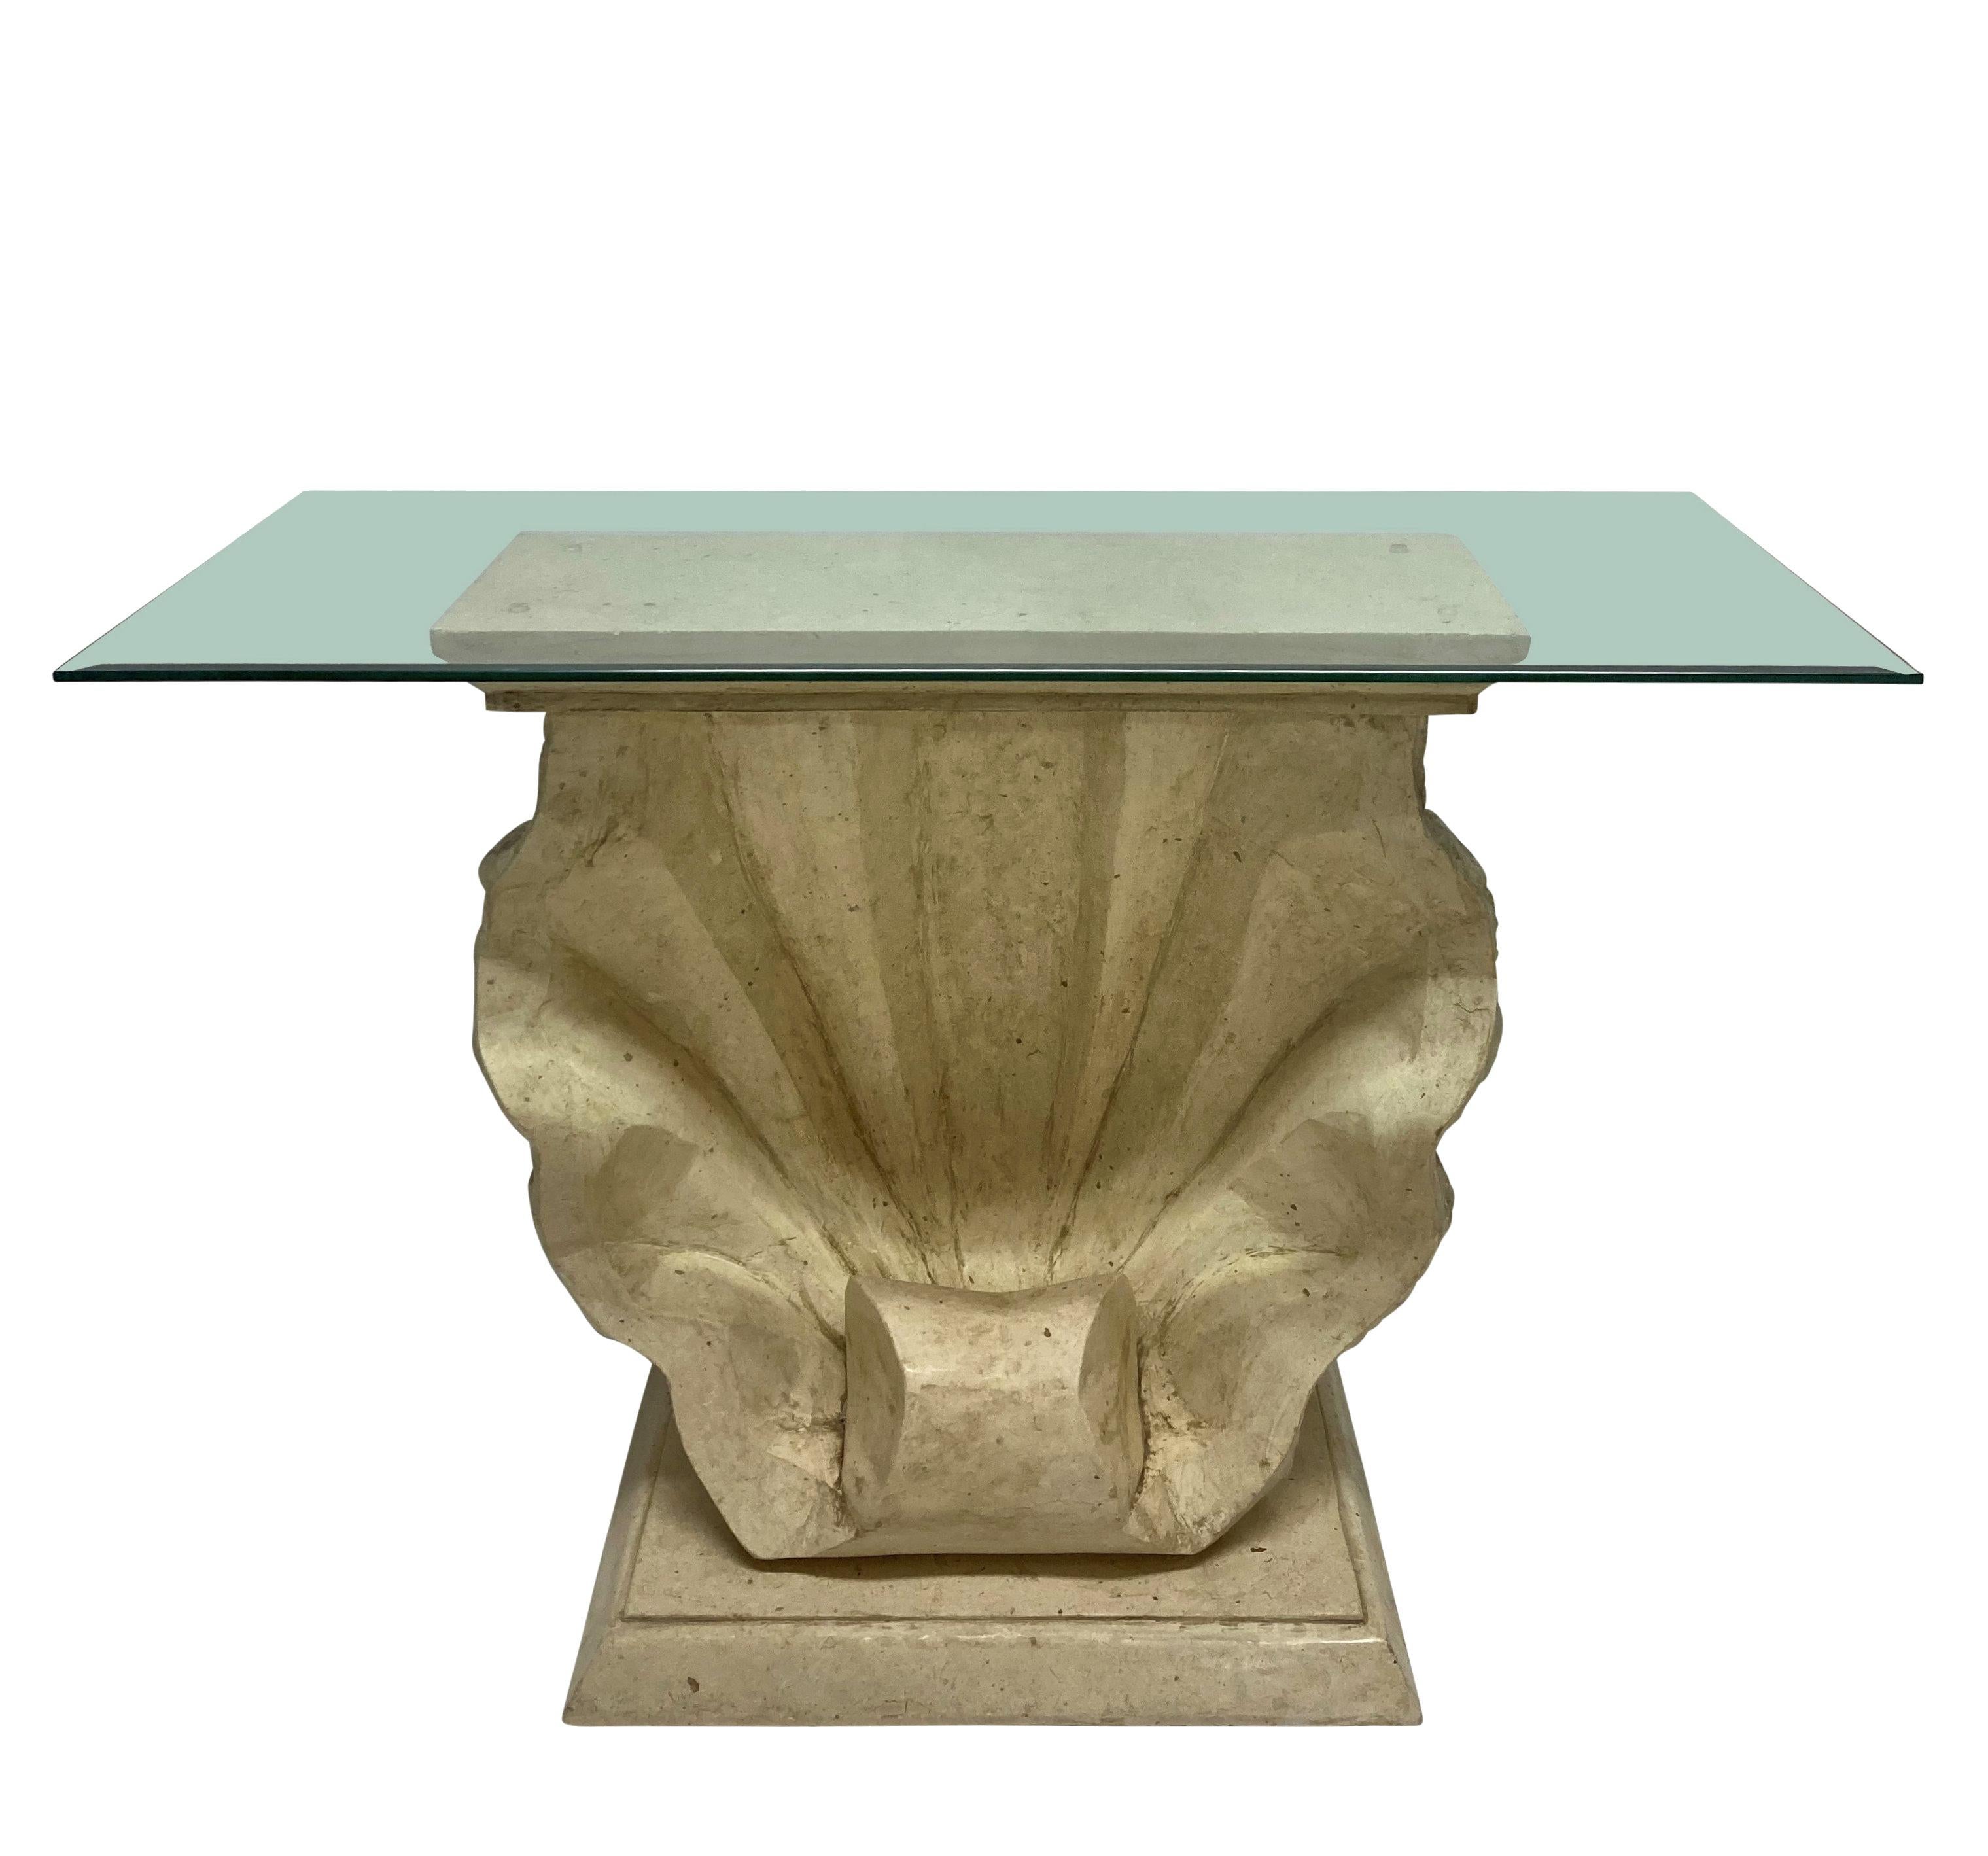 A pair of Large French Mid-Century scallop shell console tables in the manner of Serge Roche. Of stone and plaster with transparent clear bevelled glass tops, the consoles can be reversed and used either way round. The reverse has a much more